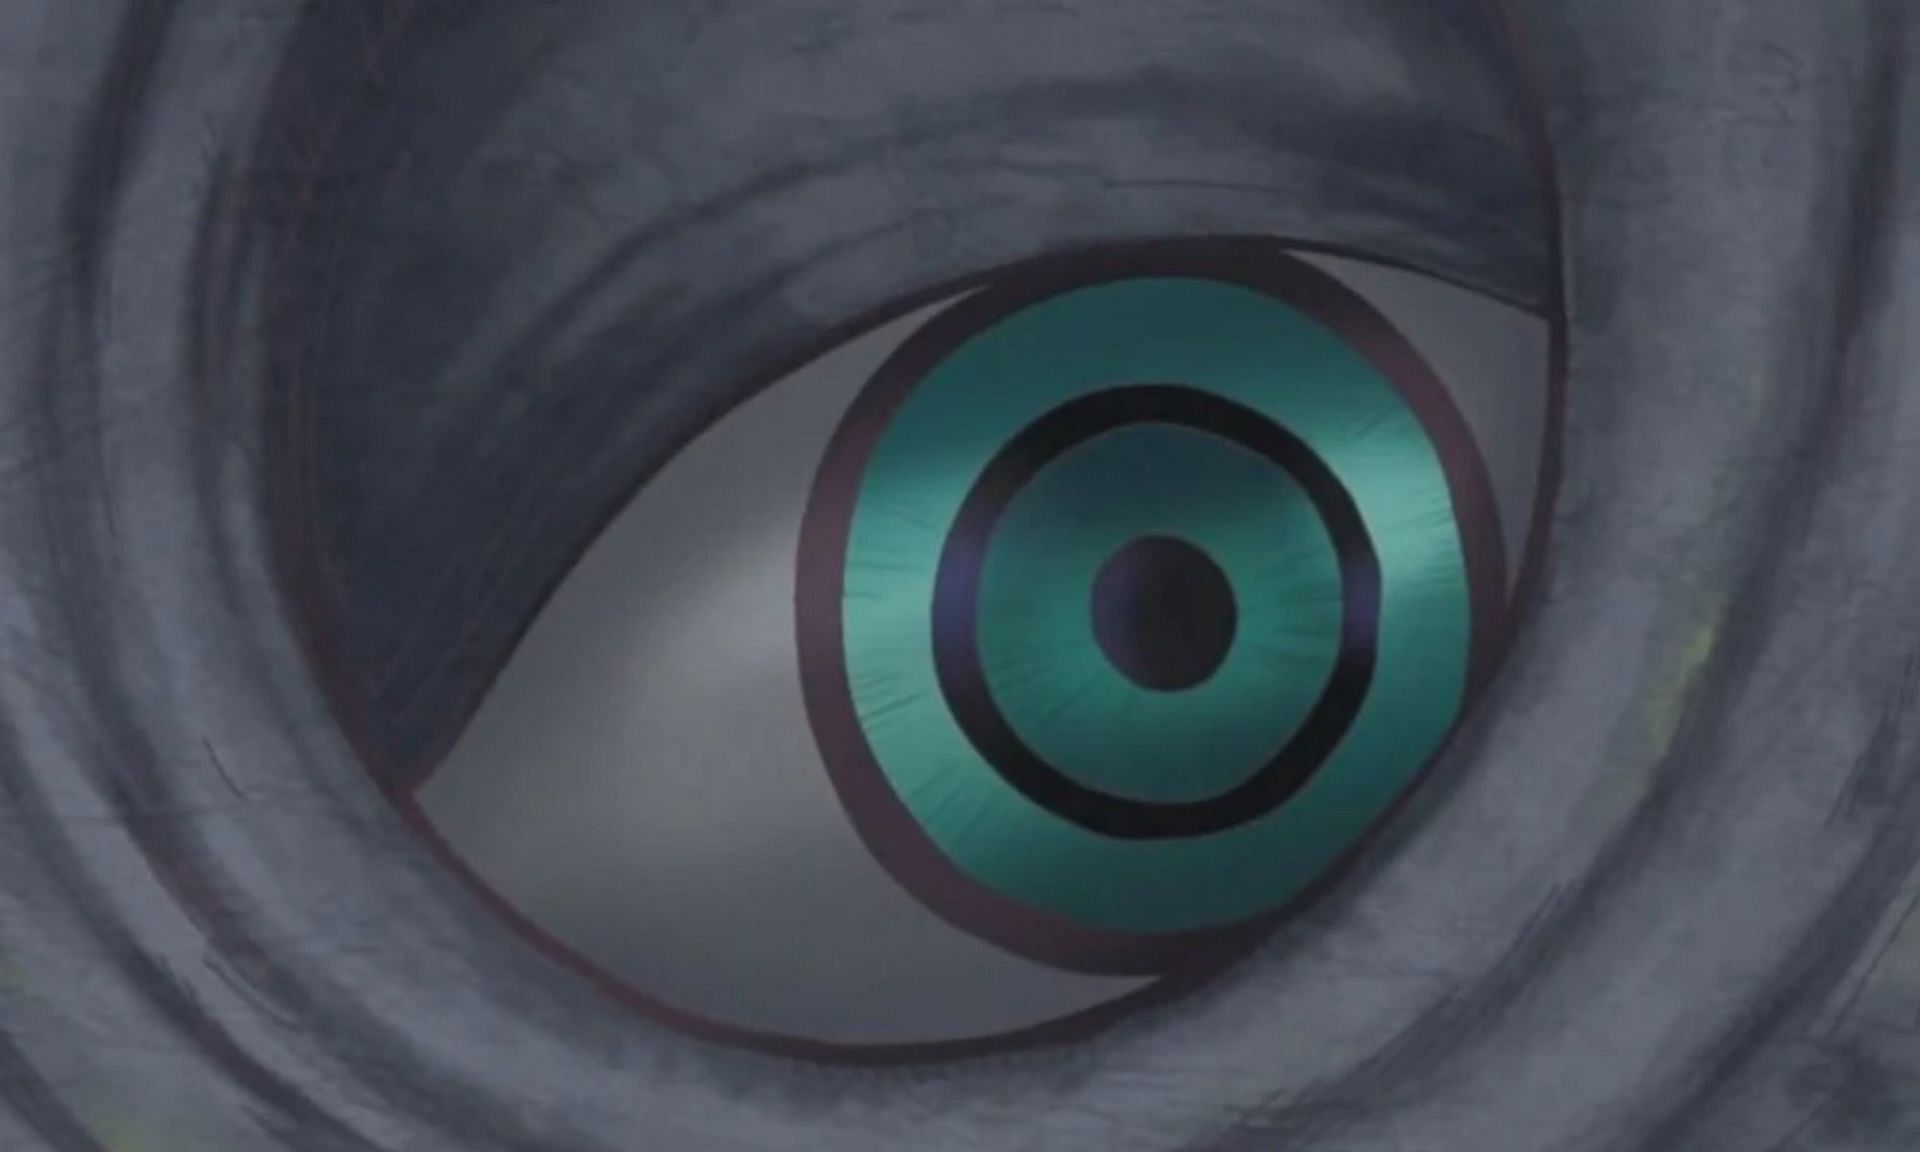 The rarely seen eyes of this giant elephant (Image via Toei Animation)